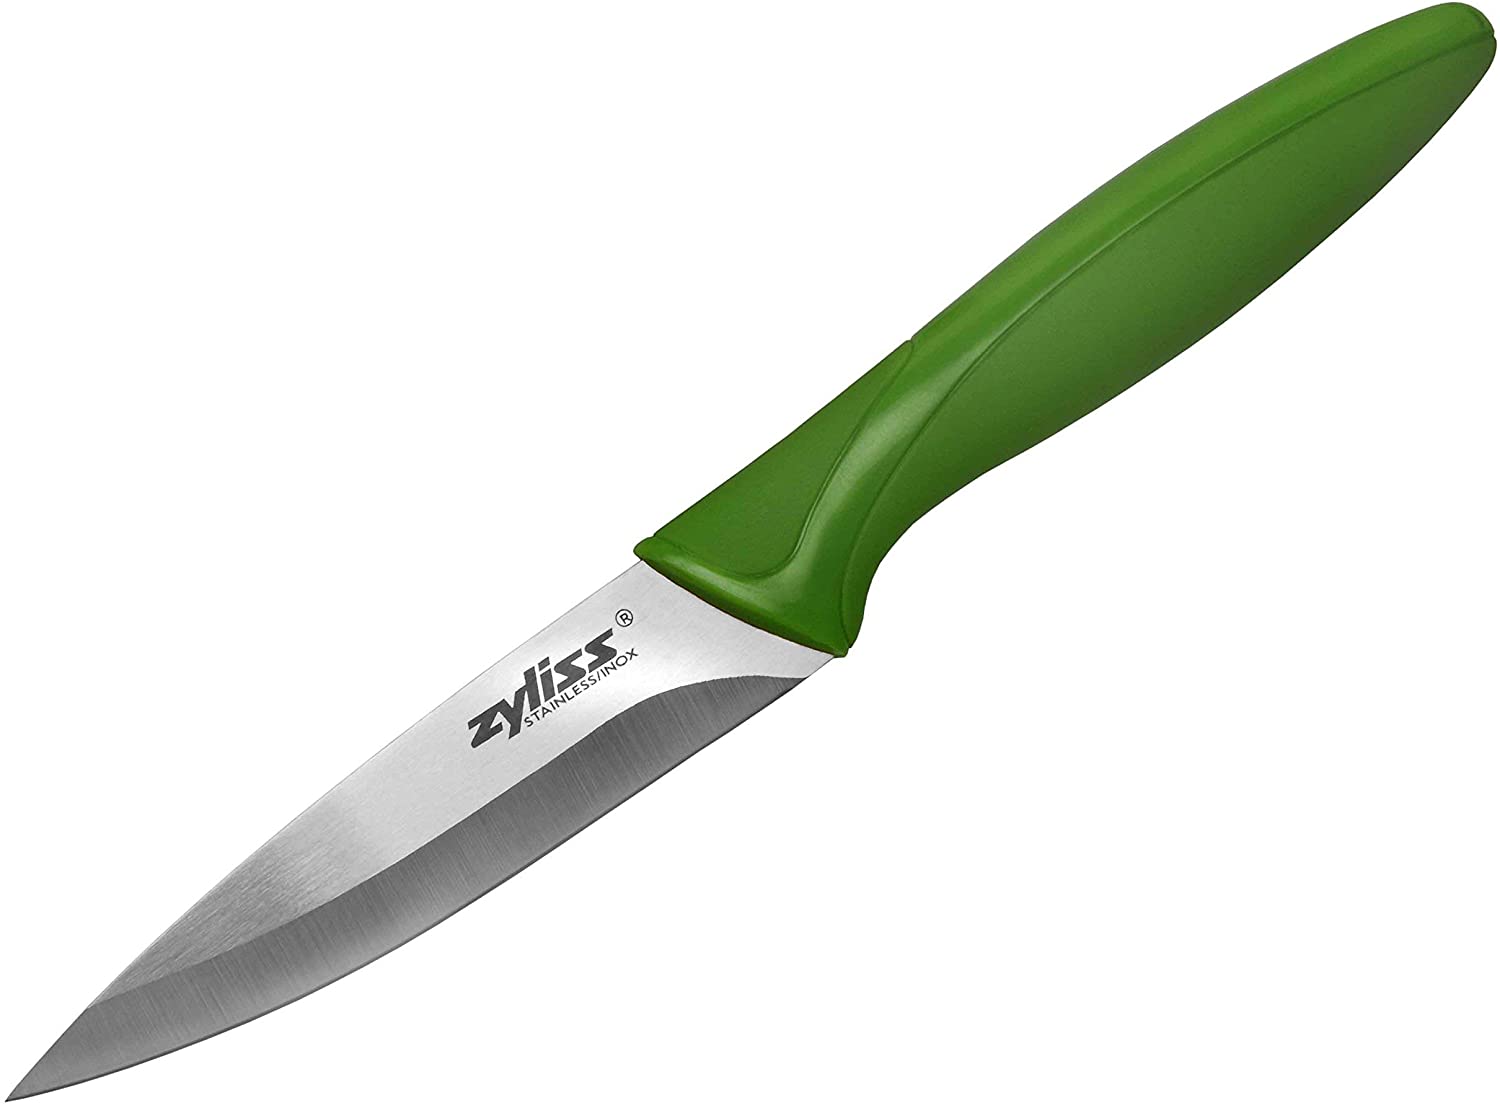 Zyliss 9 cm Paring Knife with Blade Cover, Green